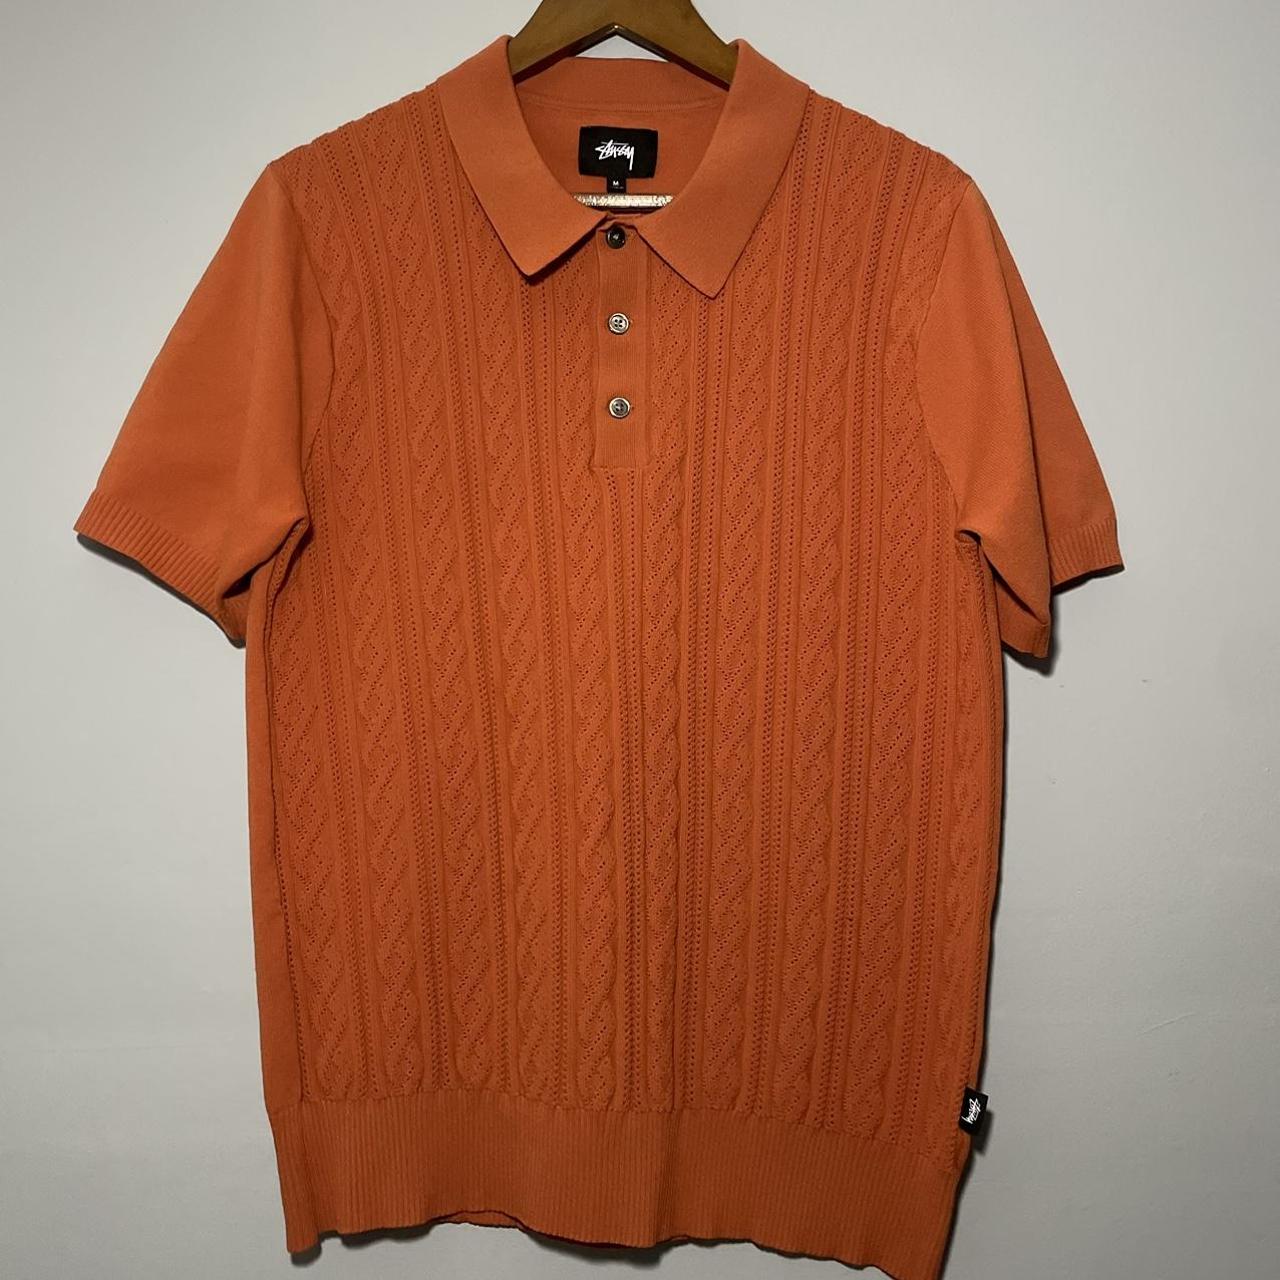 Stussy knit polo, Orange Rust Color, Very unique nice...